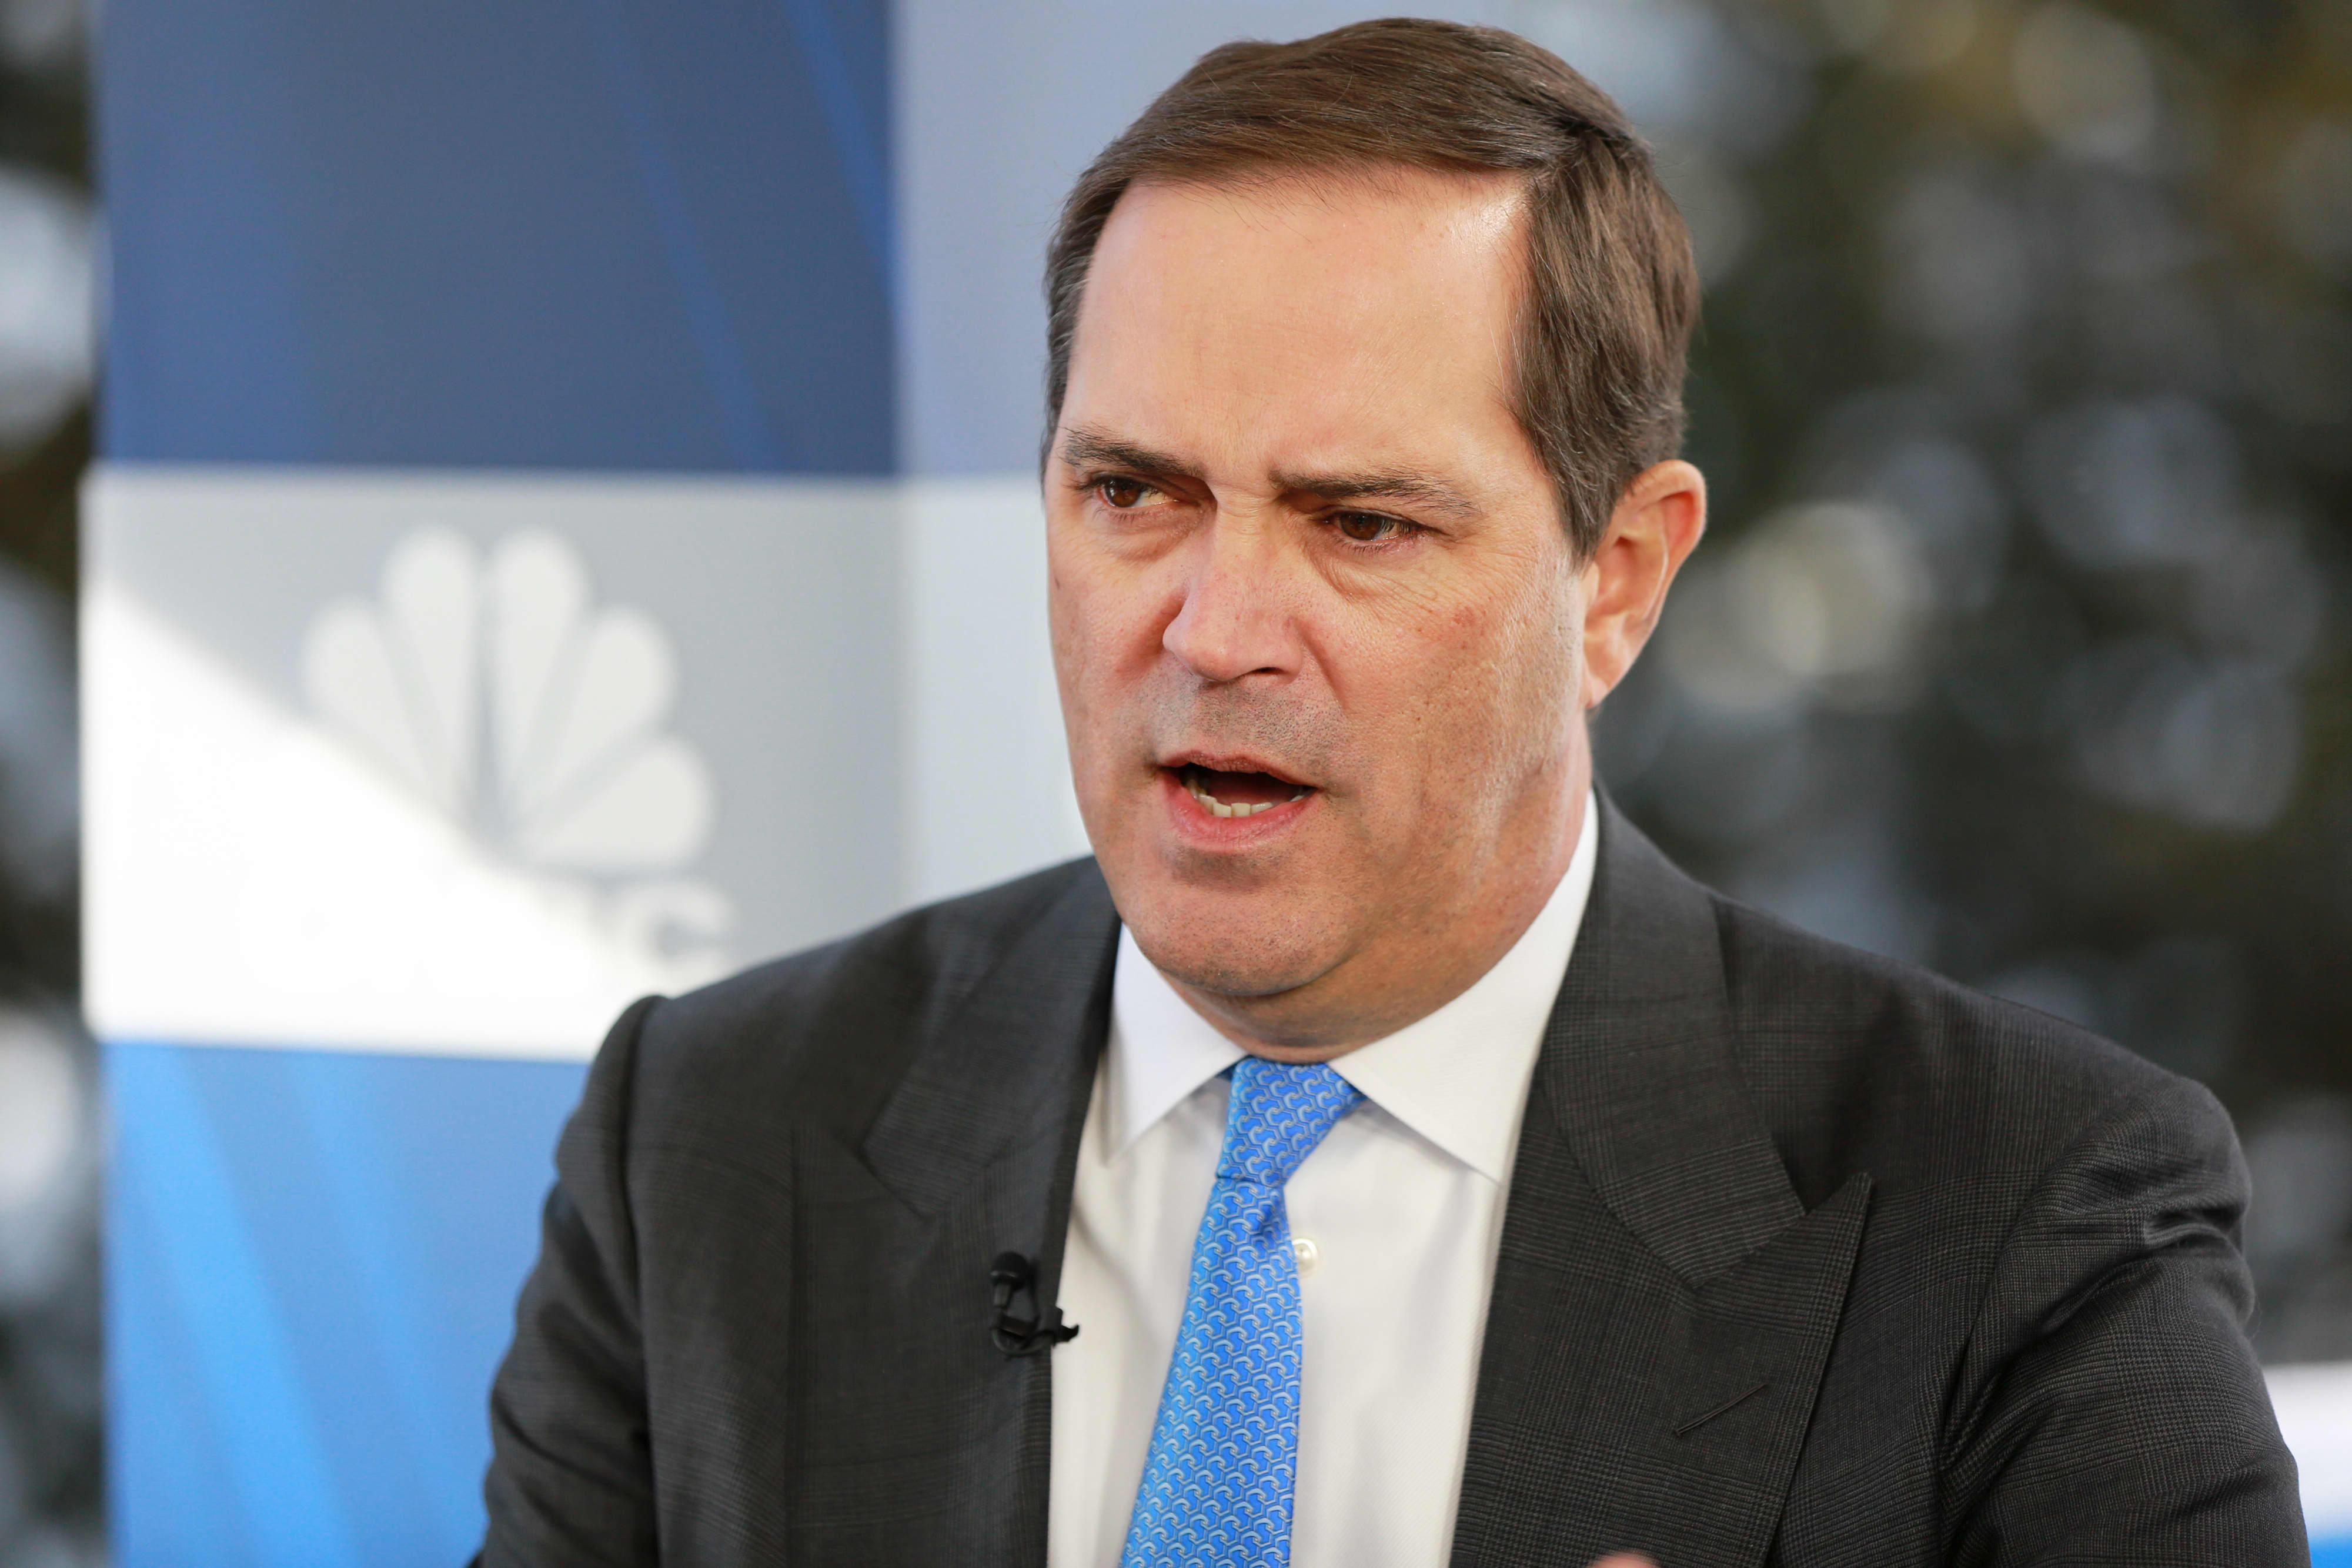 What slowdown? Fresh off earnings beat, Cisco CEO sees a lot of opportunity right now